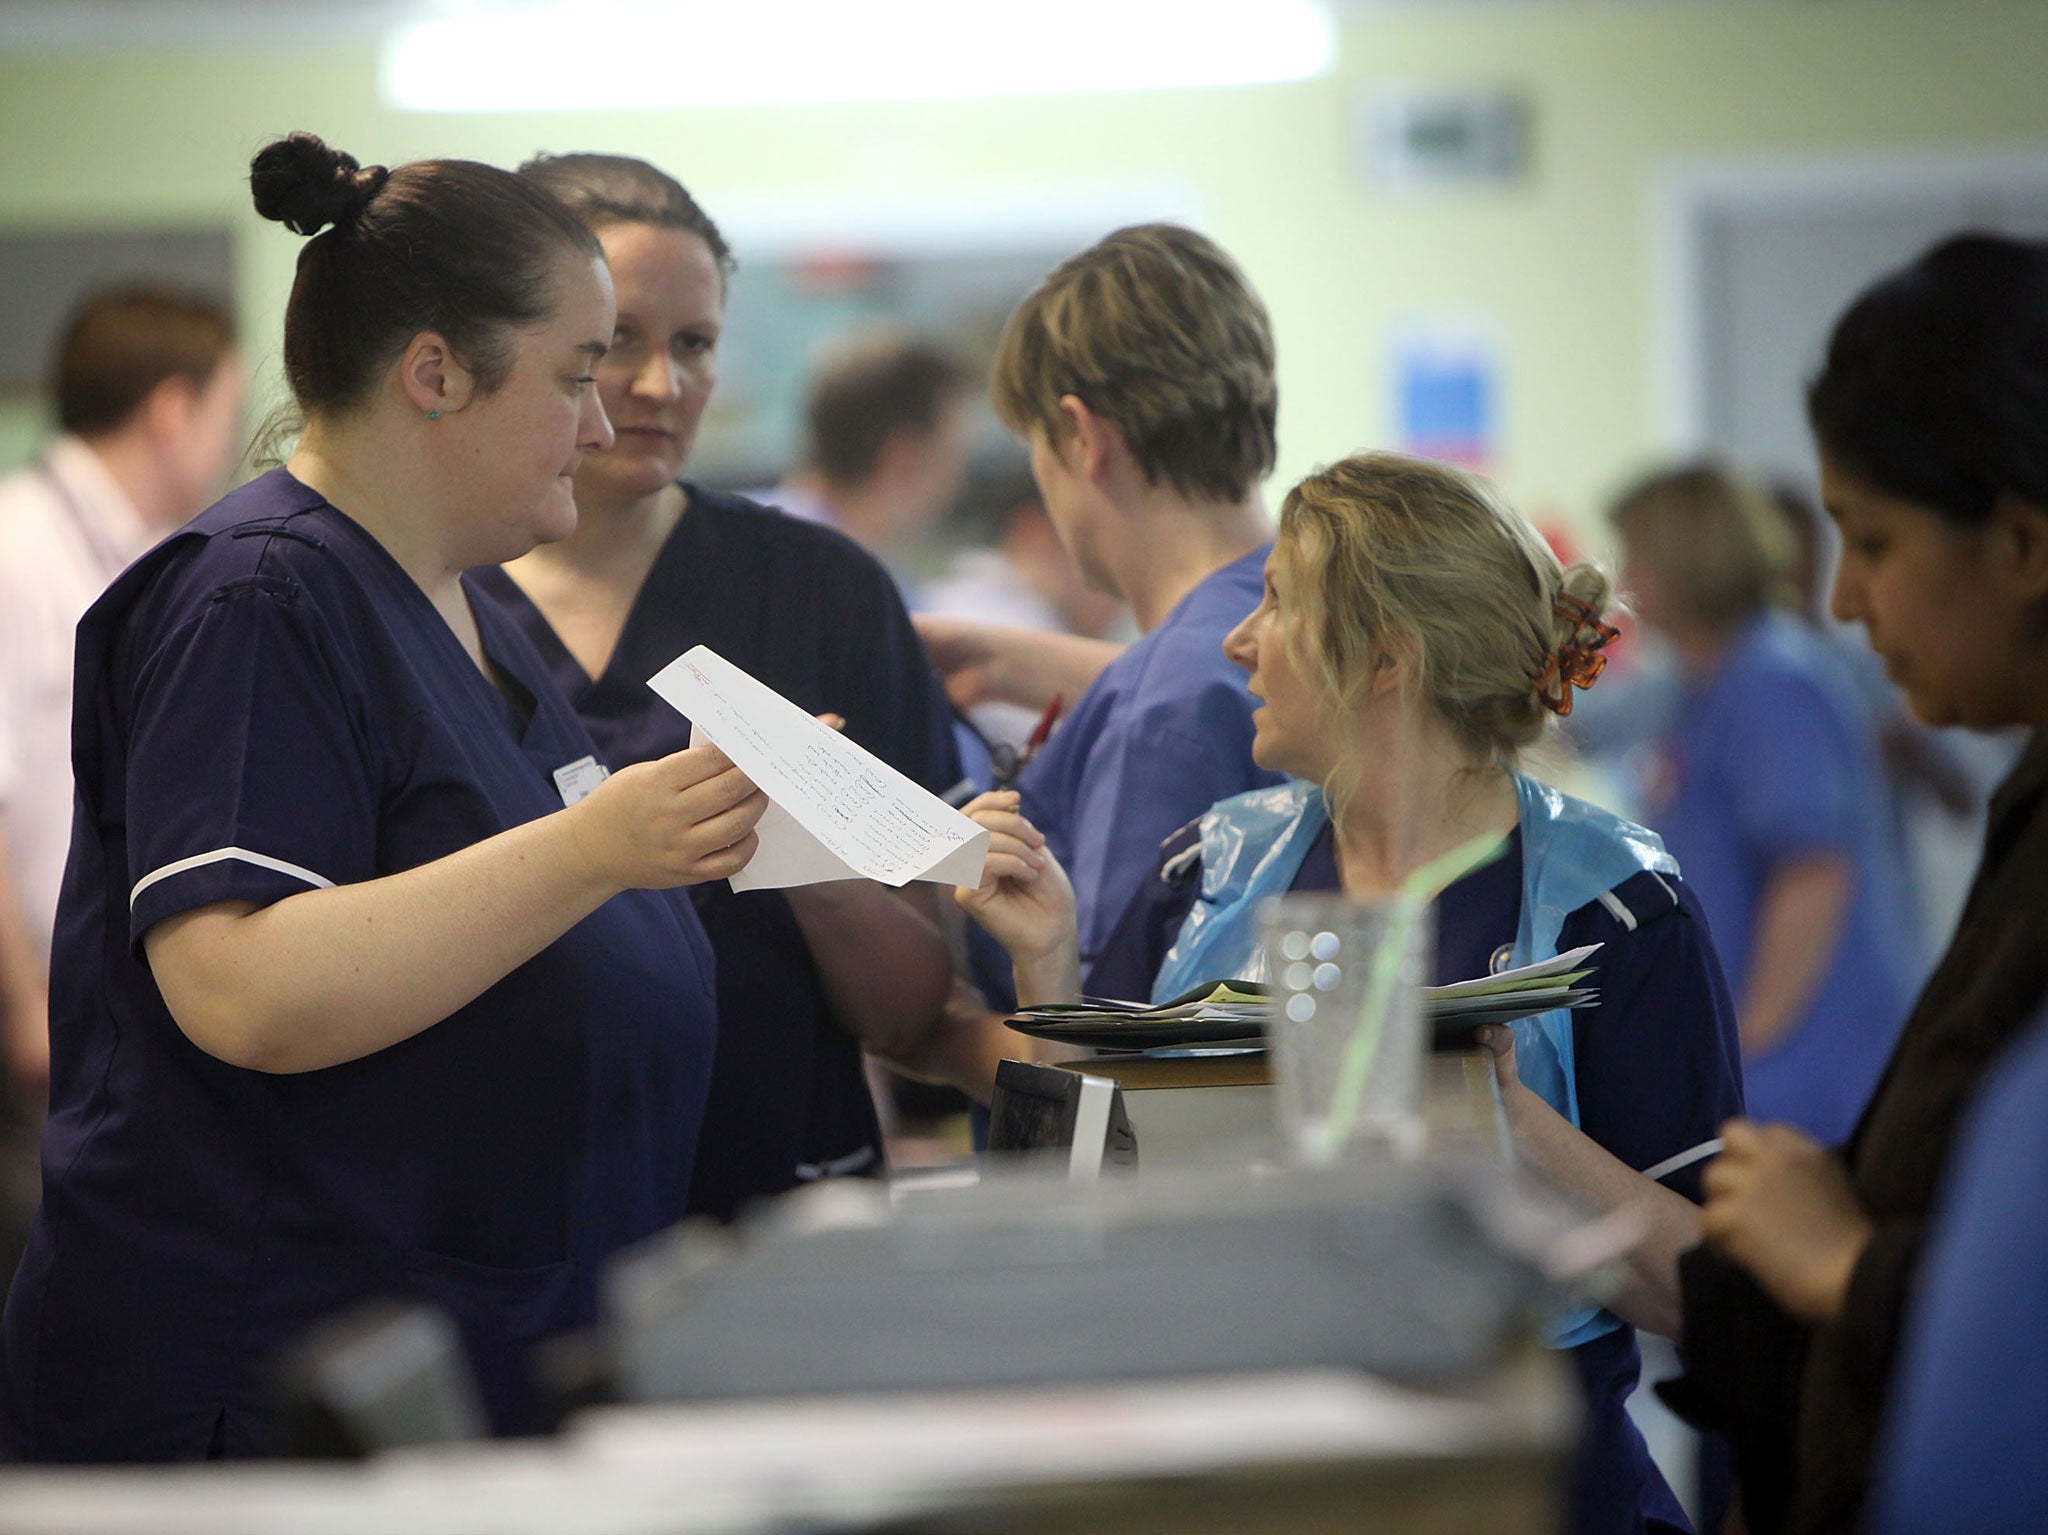 NHS bosses in London have appealed to nurses and doctors to work extra shifts